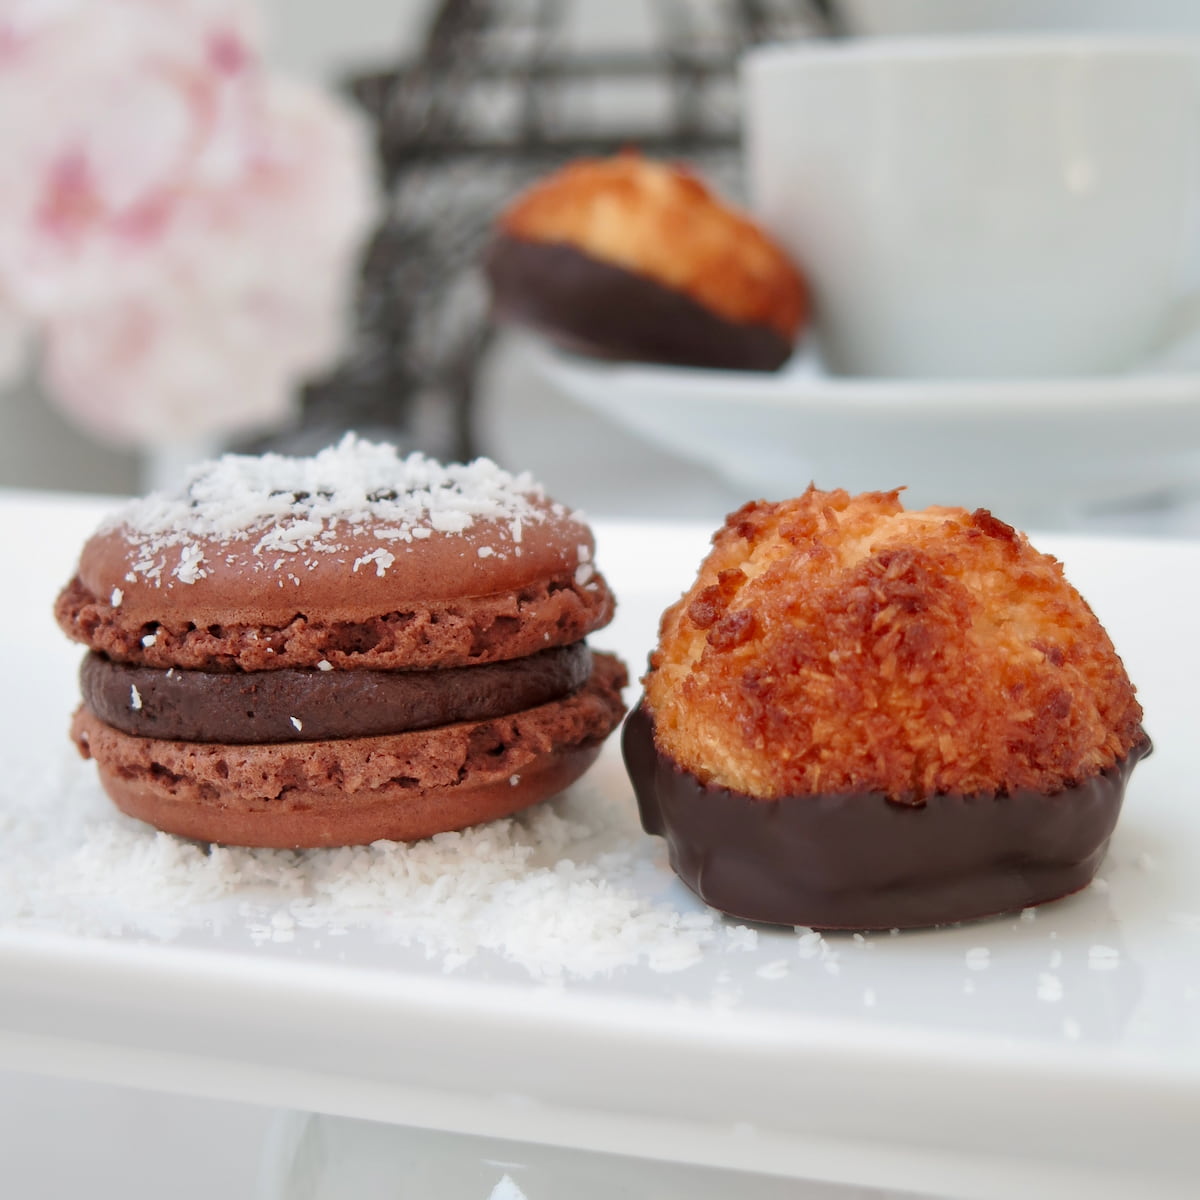 a coconut macaroon vs a macaron to show how different they are in appearance as macarons have a foot